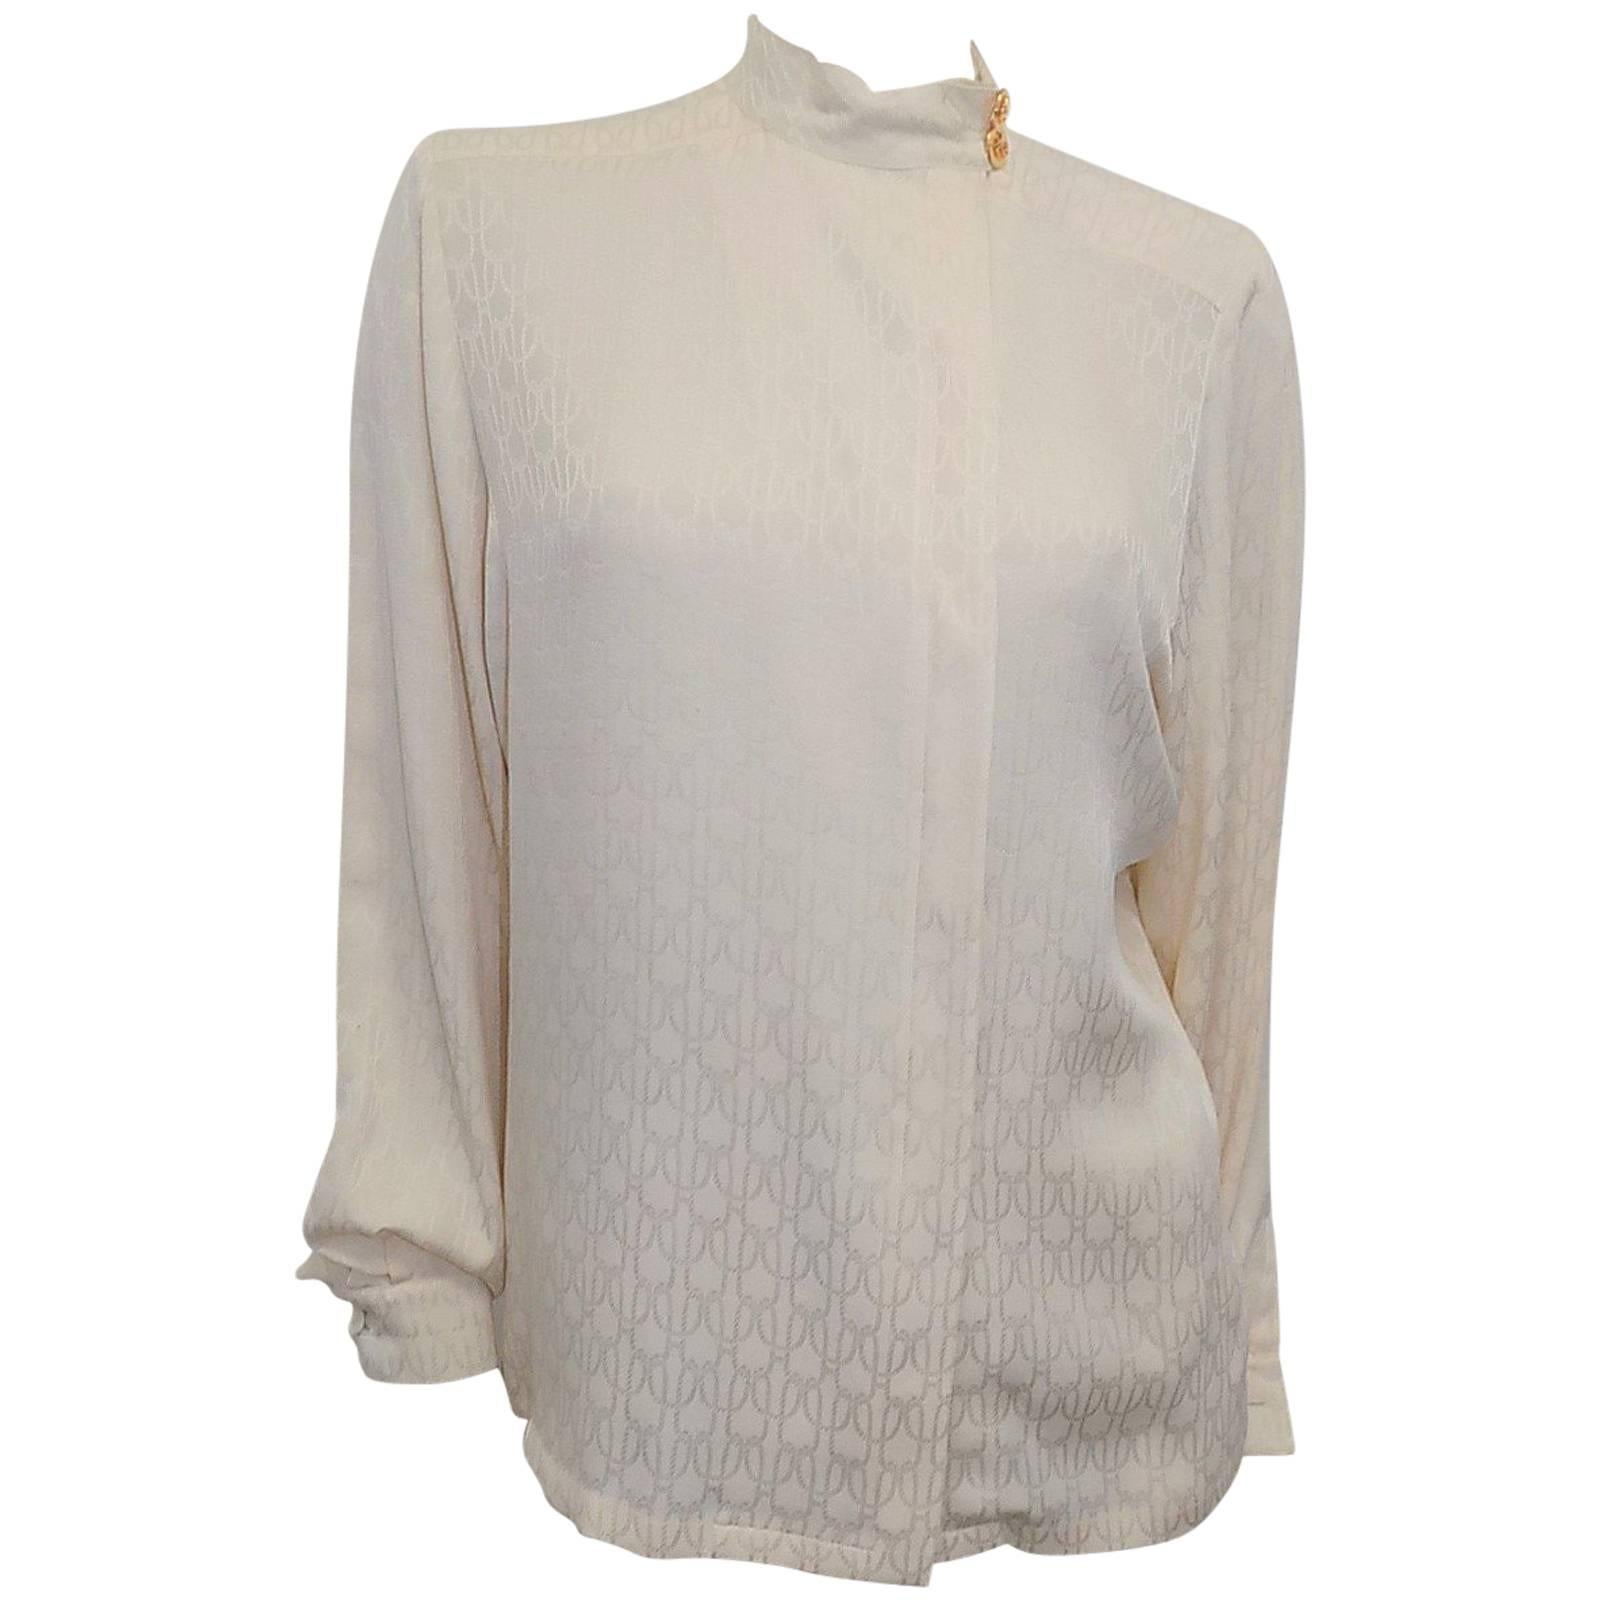 Hermes Stunning Jacquard silk print creme blouse w gold buttons For Sale